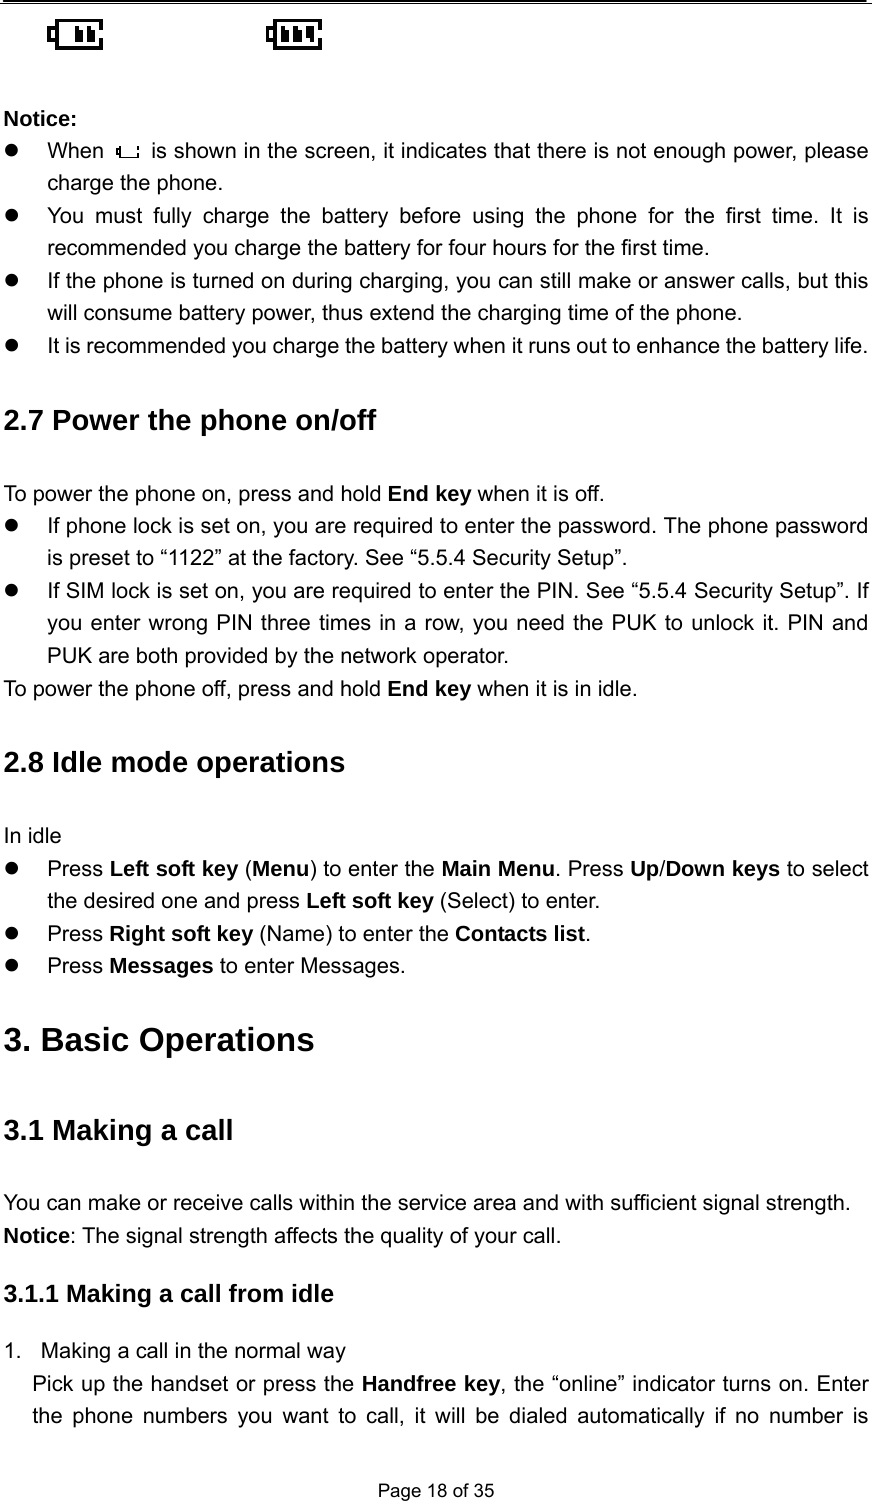  Page 18 of 35        Notice: z When    is shown in the screen, it indicates that there is not enough power, please charge the phone. z  You must fully charge the battery before using the phone for the first time. It is recommended you charge the battery for four hours for the first time. z  If the phone is turned on during charging, you can still make or answer calls, but this will consume battery power, thus extend the charging time of the phone. z  It is recommended you charge the battery when it runs out to enhance the battery life. 2.7 Power the phone on/off To power the phone on, press and hold End key when it is off. z  If phone lock is set on, you are required to enter the password. The phone password is preset to “1122” at the factory. See “5.5.4 Security Setup”. z  If SIM lock is set on, you are required to enter the PIN. See “5.5.4 Security Setup”. If you enter wrong PIN three times in a row, you need the PUK to unlock it. PIN and PUK are both provided by the network operator. To power the phone off, press and hold End key when it is in idle. 2.8 Idle mode operations In idle z Press Left soft key (Menu) to enter the Main Menu. Press Up/Down keys to select the desired one and press Left soft key (Select) to enter. z Press Right soft key (Name) to enter the Contacts list. z Press Messages to enter Messages. 3. Basic Operations 3.1 Making a call You can make or receive calls within the service area and with sufficient signal strength. Notice: The signal strength affects the quality of your call. 3.1.1 Making a call from idle 1.  Making a call in the normal way Pick up the handset or press the Handfree key, the “online” indicator turns on. Enter the phone numbers you want to call, it will be dialed automatically if no number is 